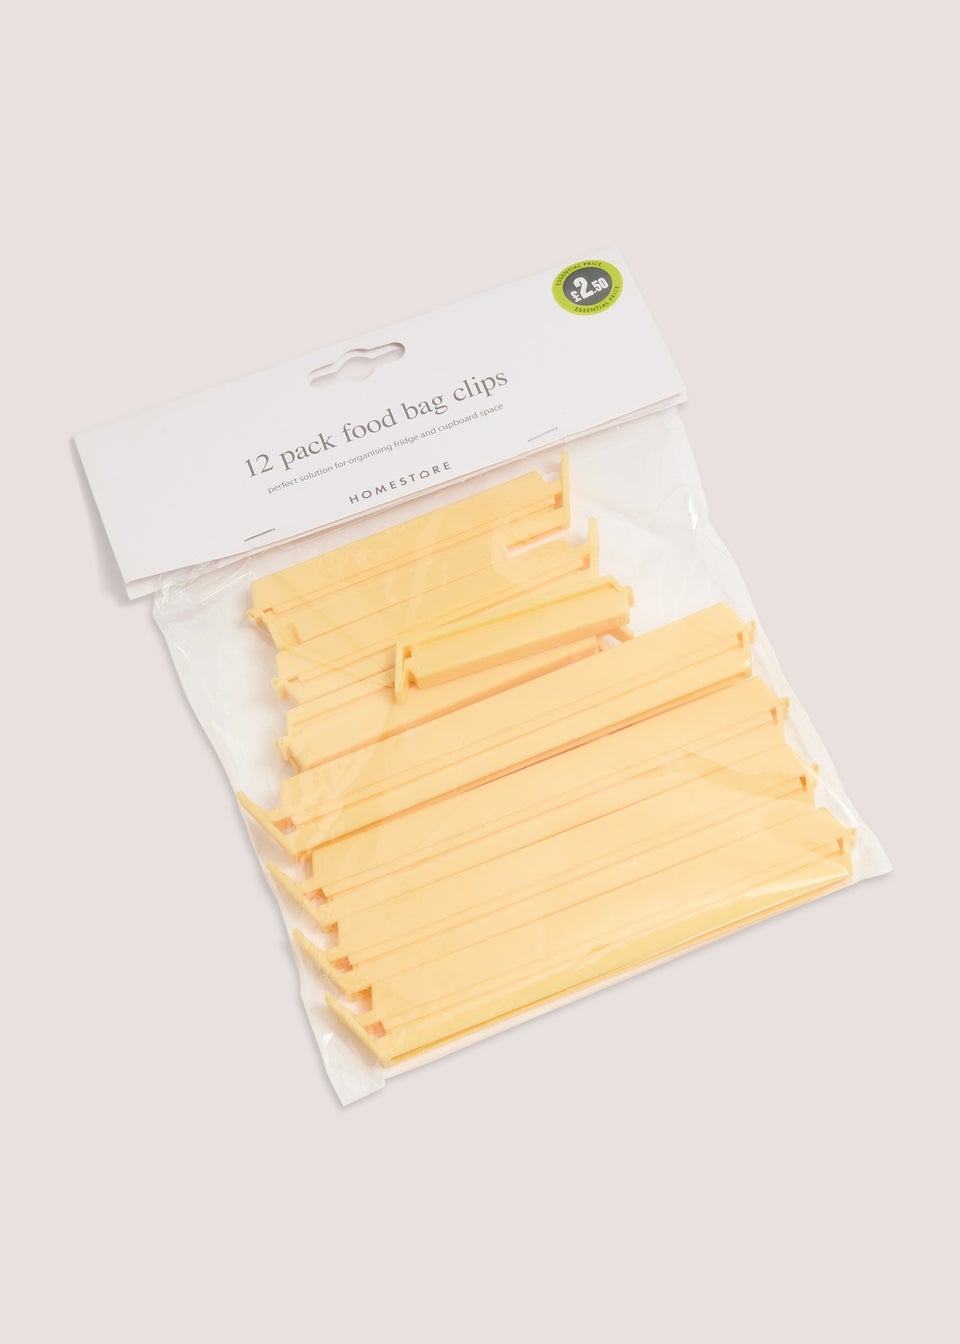 12 Pack Yellow Bag Clips